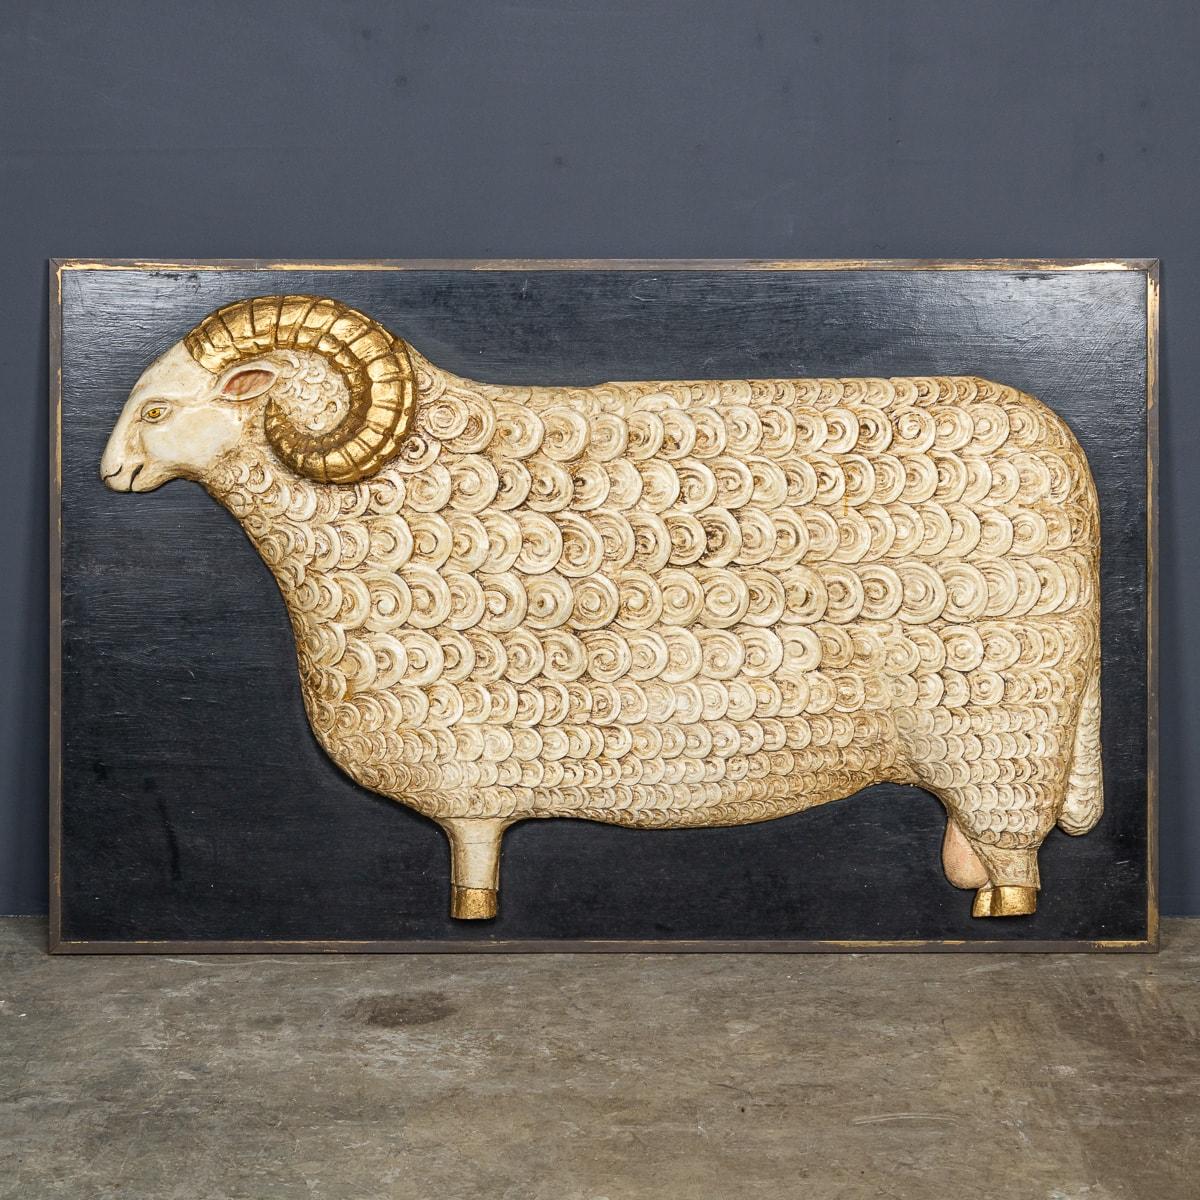 A Vintage 20th Century wooden sign depicting a ram. This painted sign is adorned with a thin brass frame surrounding the edge, accentuating the golden horns on the ram. Originating from a wool shop in the English Cotswolds, it carries a rich history